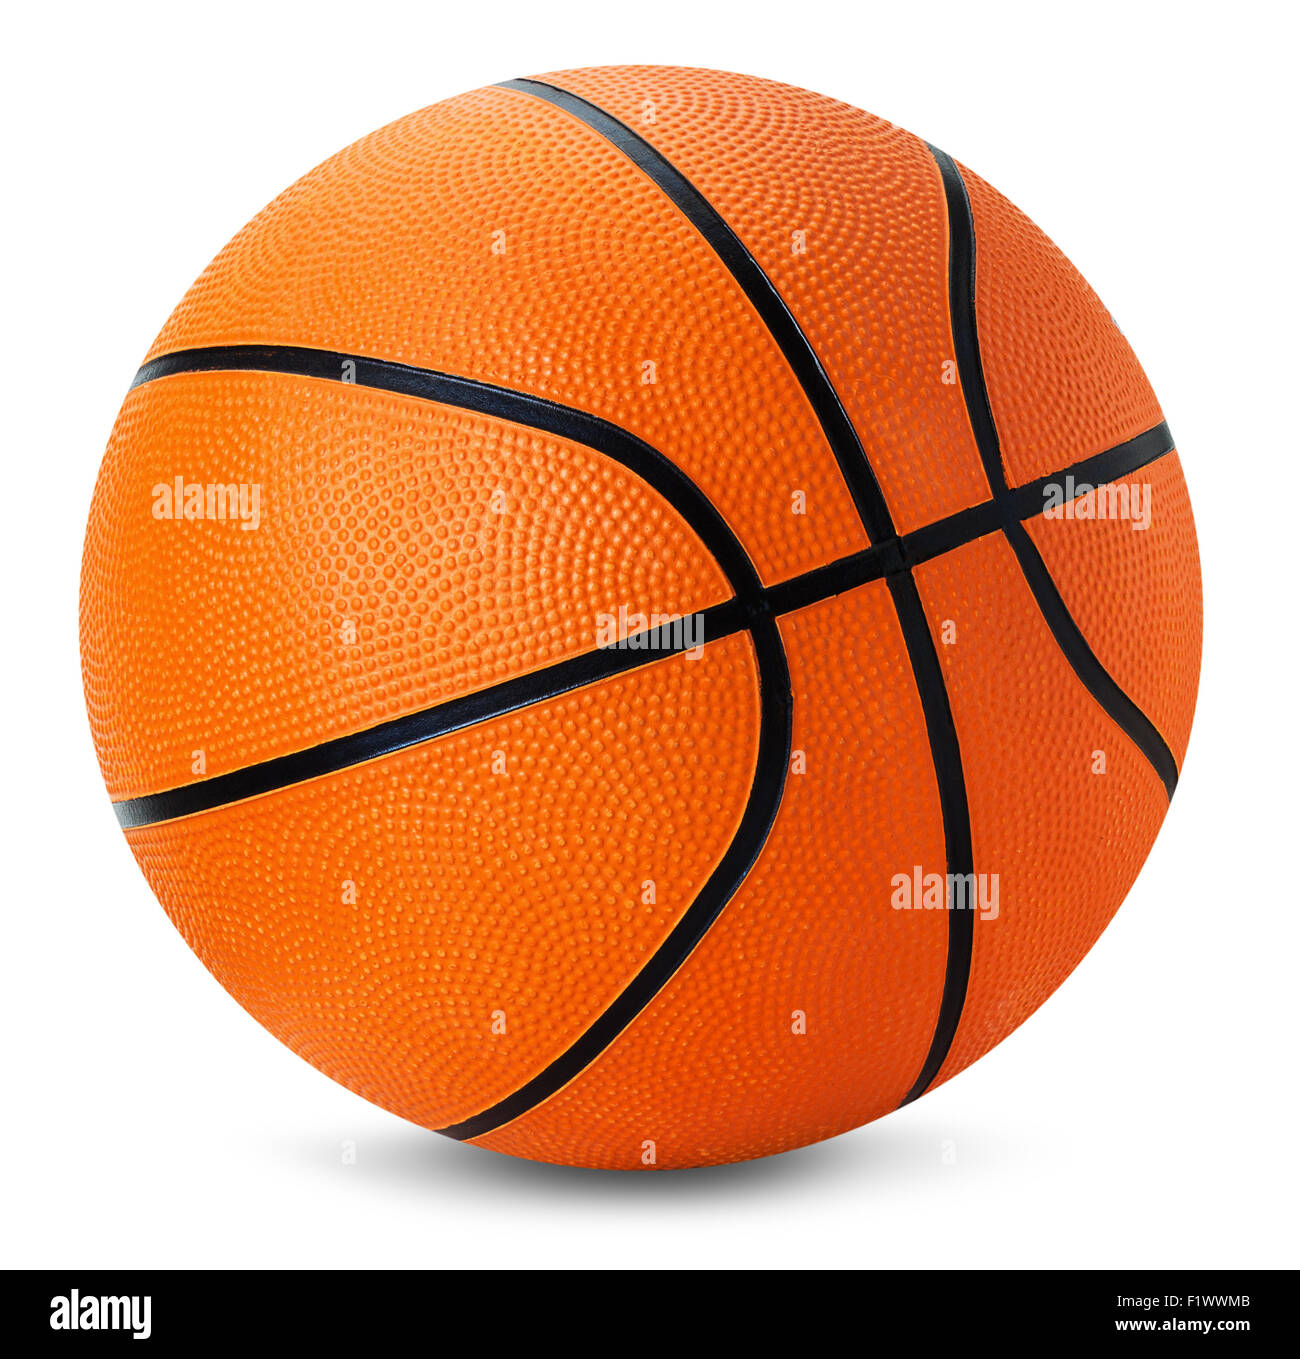 basketball ball isolated on the white background. Stock Photo